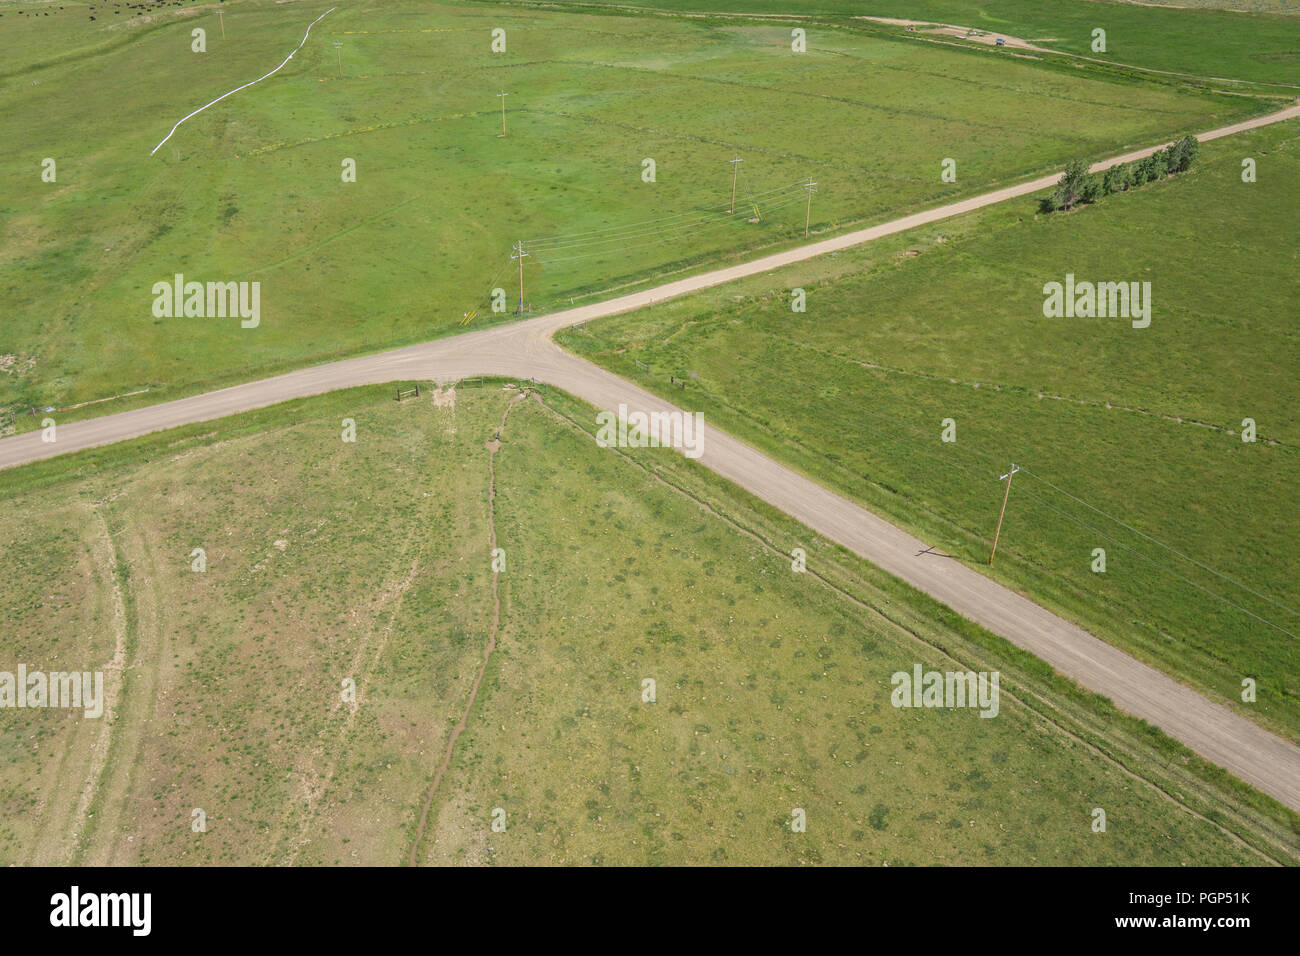 Intersection of dirt and gravel farming roads between green fields in the American midwest. Stock Photo